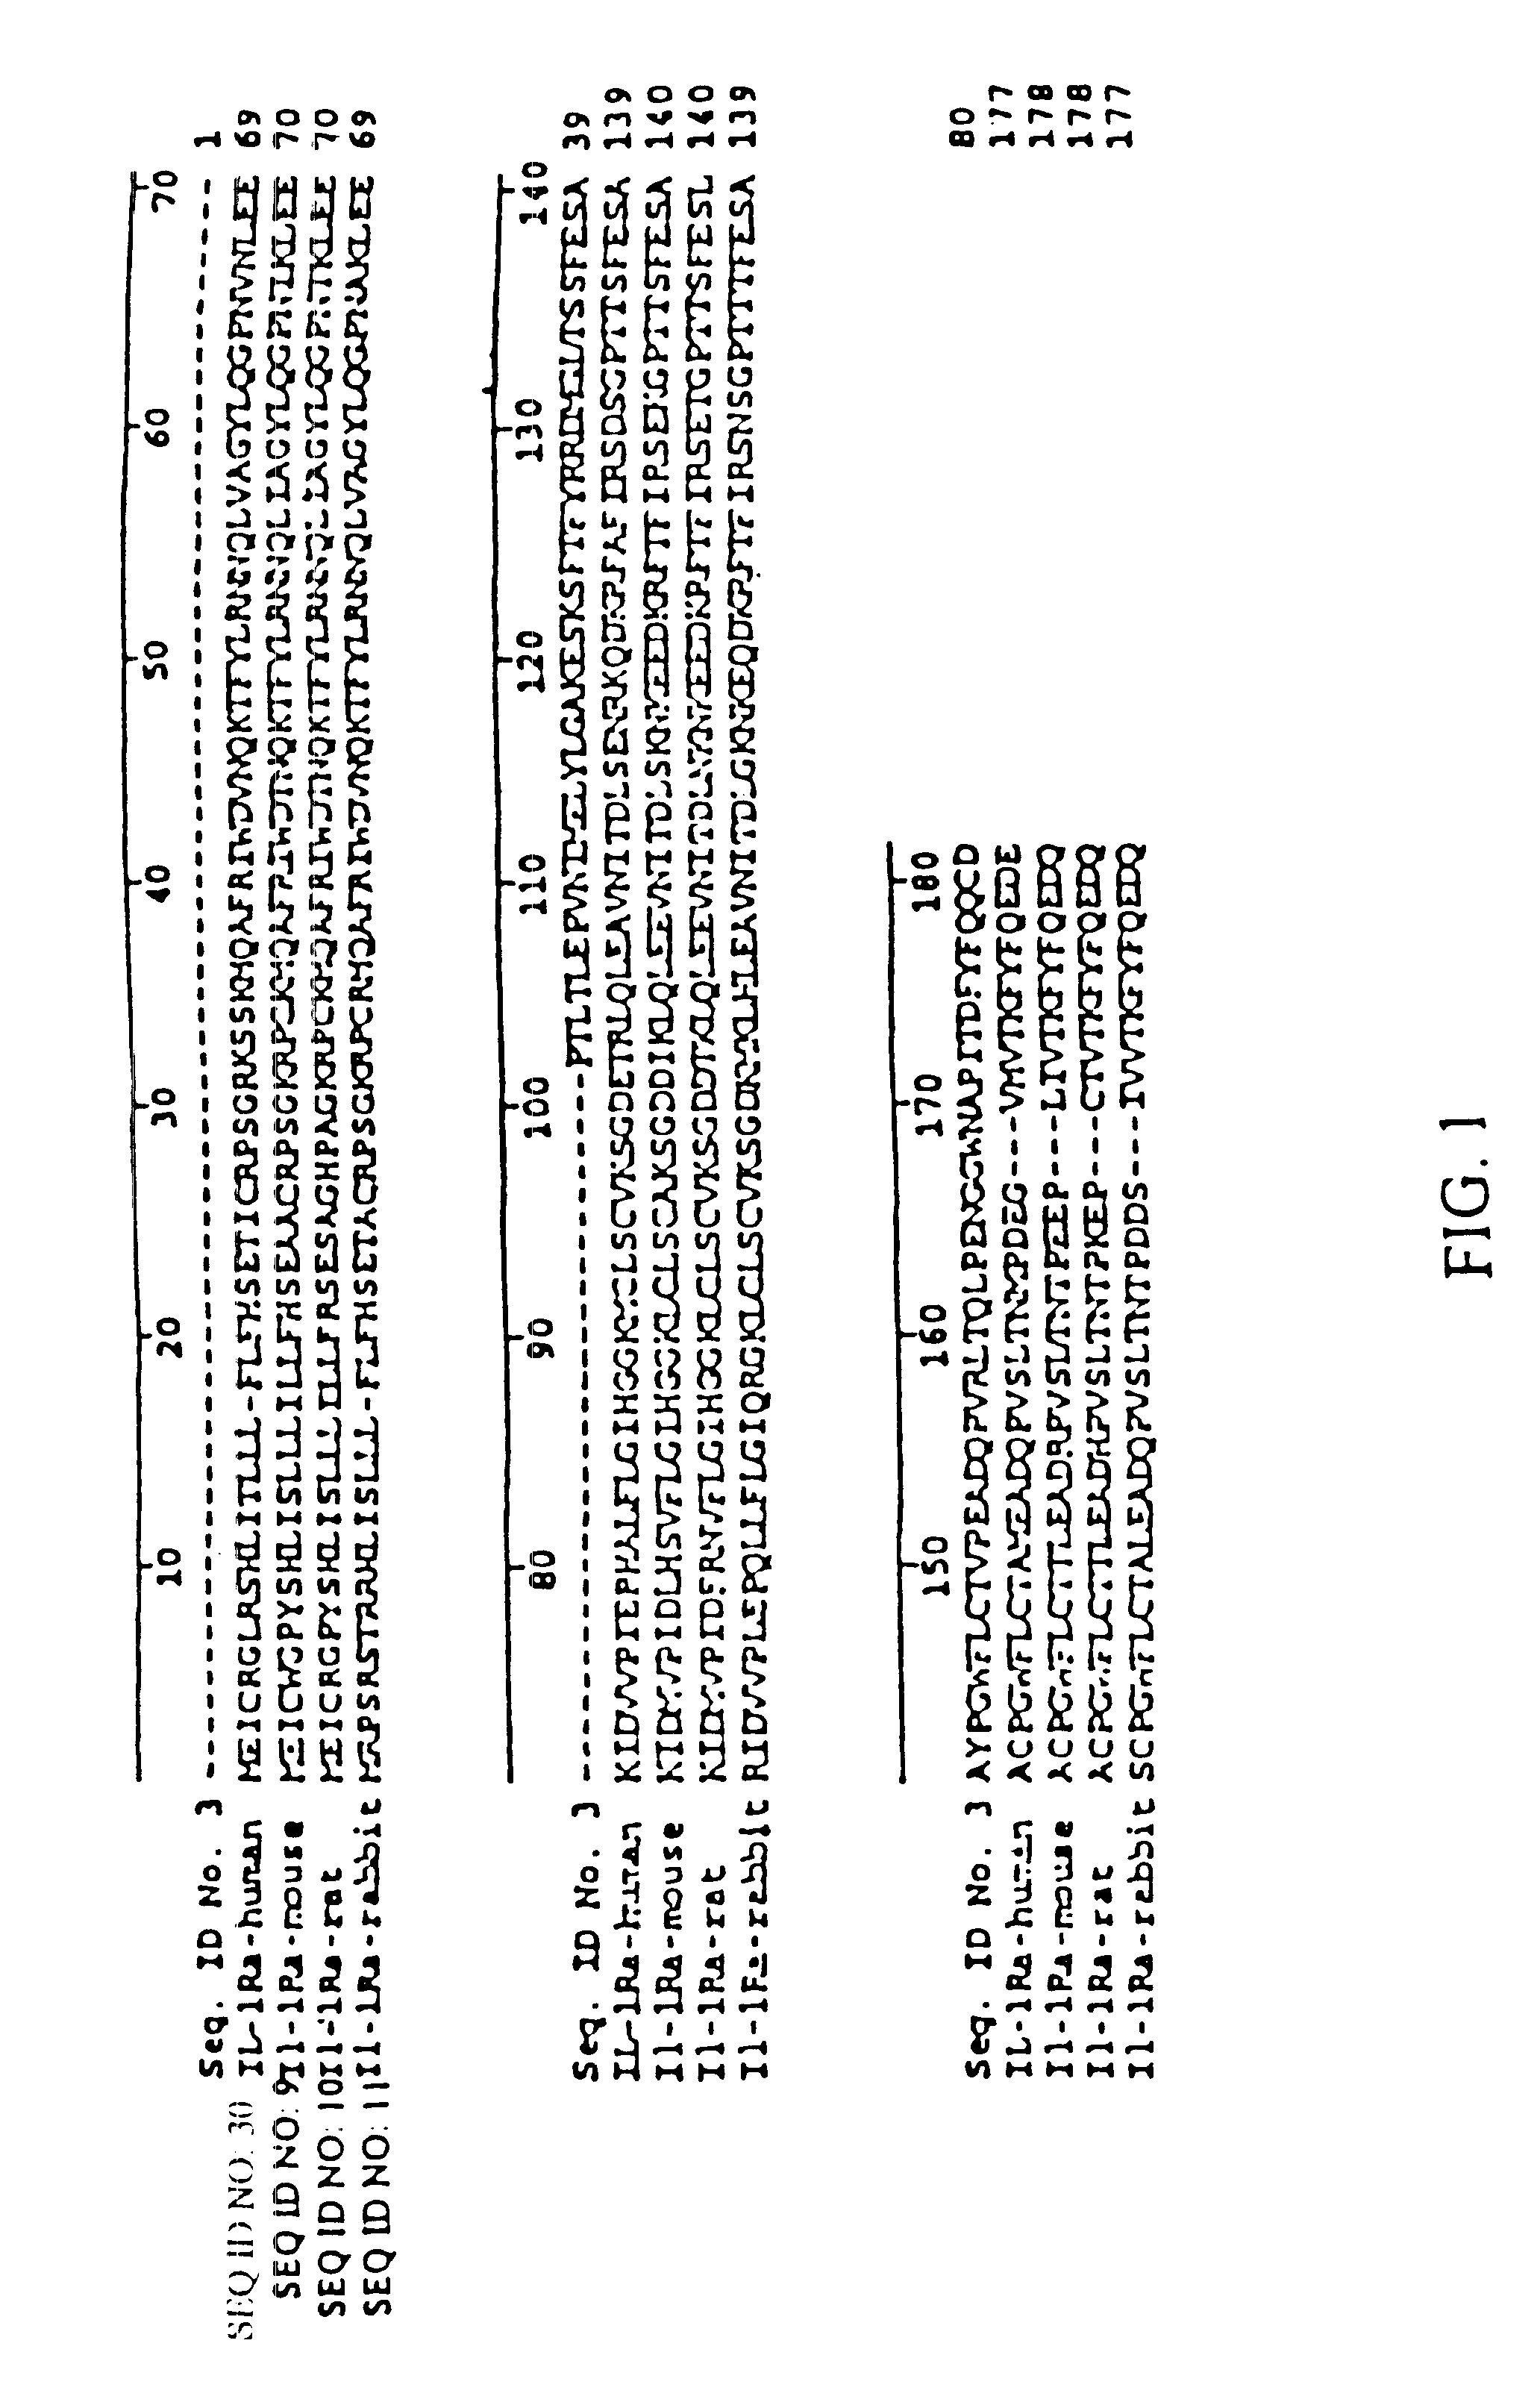 Interleukin-1 receptor antagonist and uses thereof